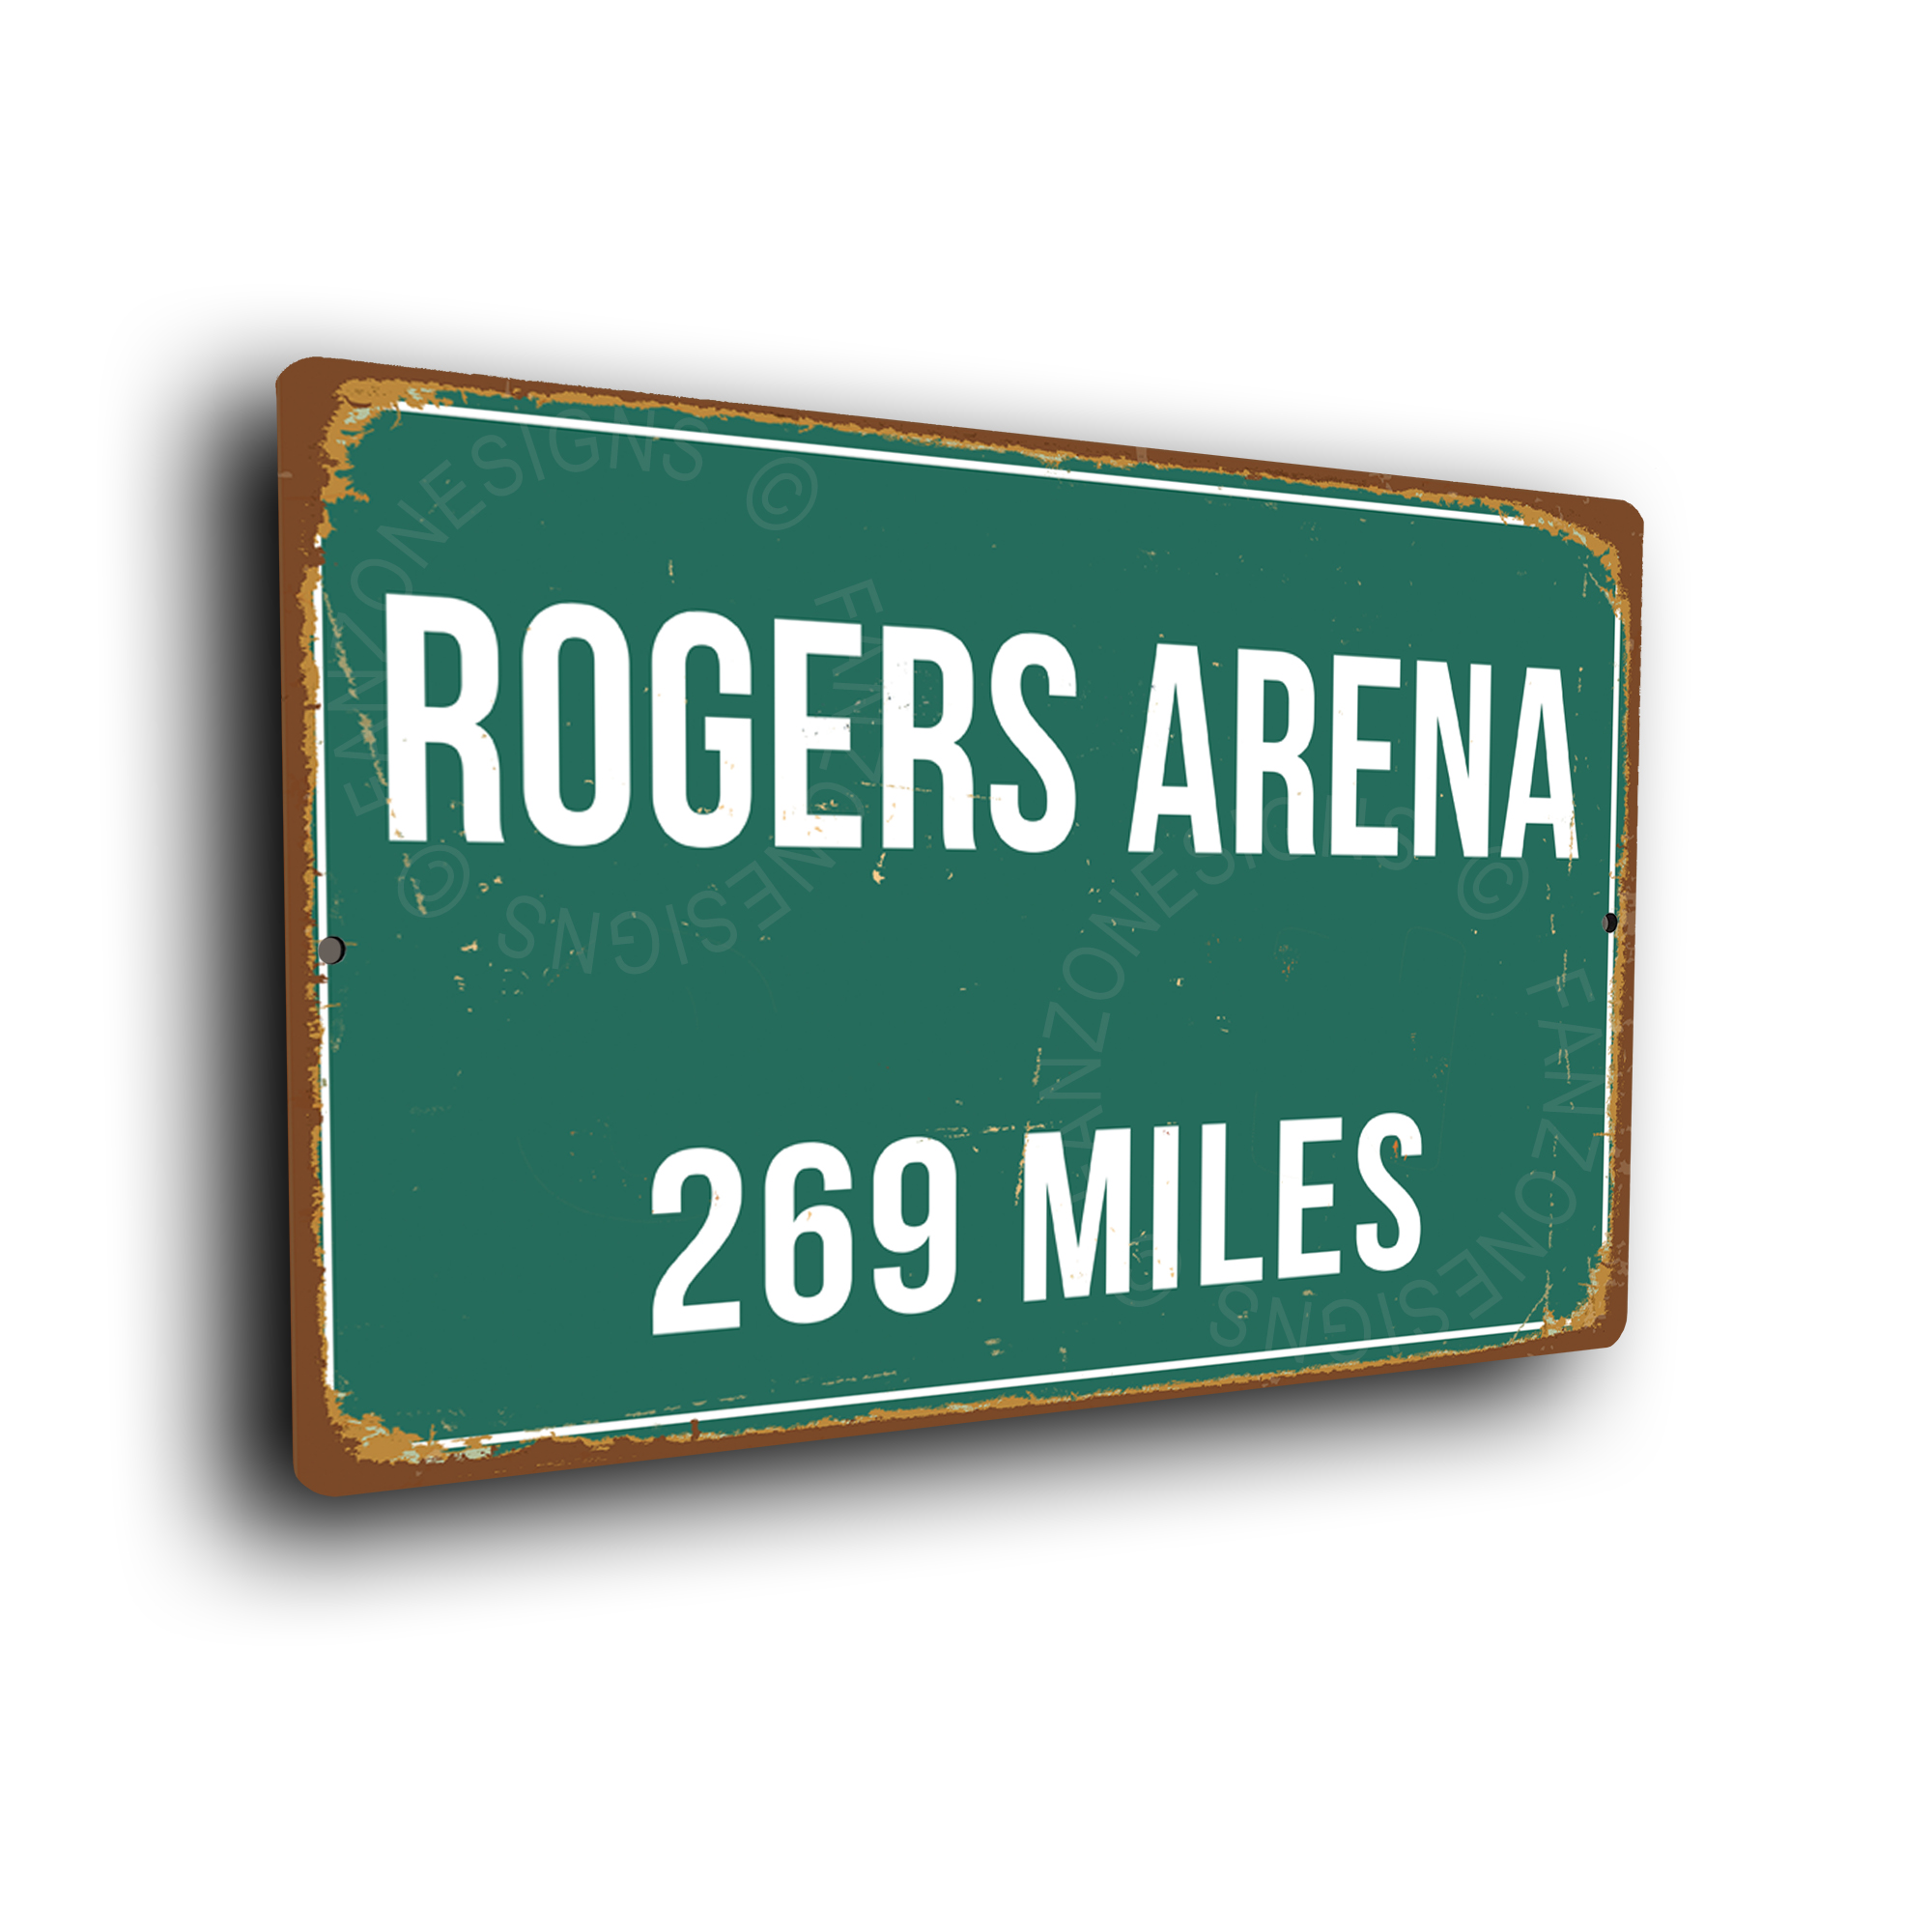 Rogers Arena Signs